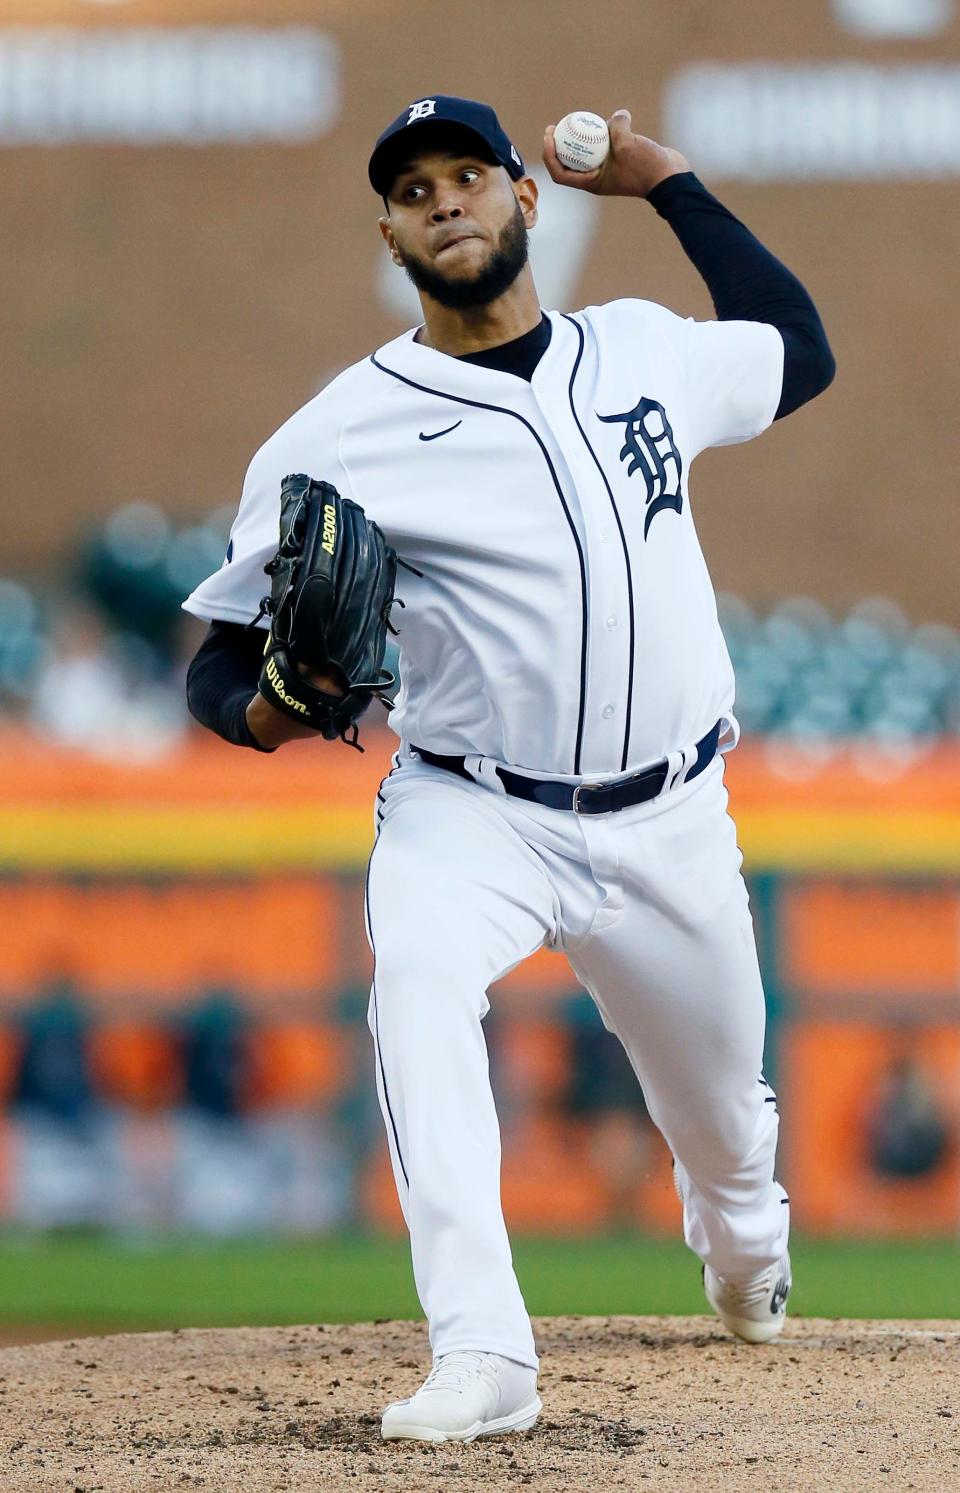 Eduardo Rodriguez (57) of the Detroit Tigers pitches against the Houston Astros during the second inning at Comerica Park on September 12, 2022, in Detroit, Michigan.